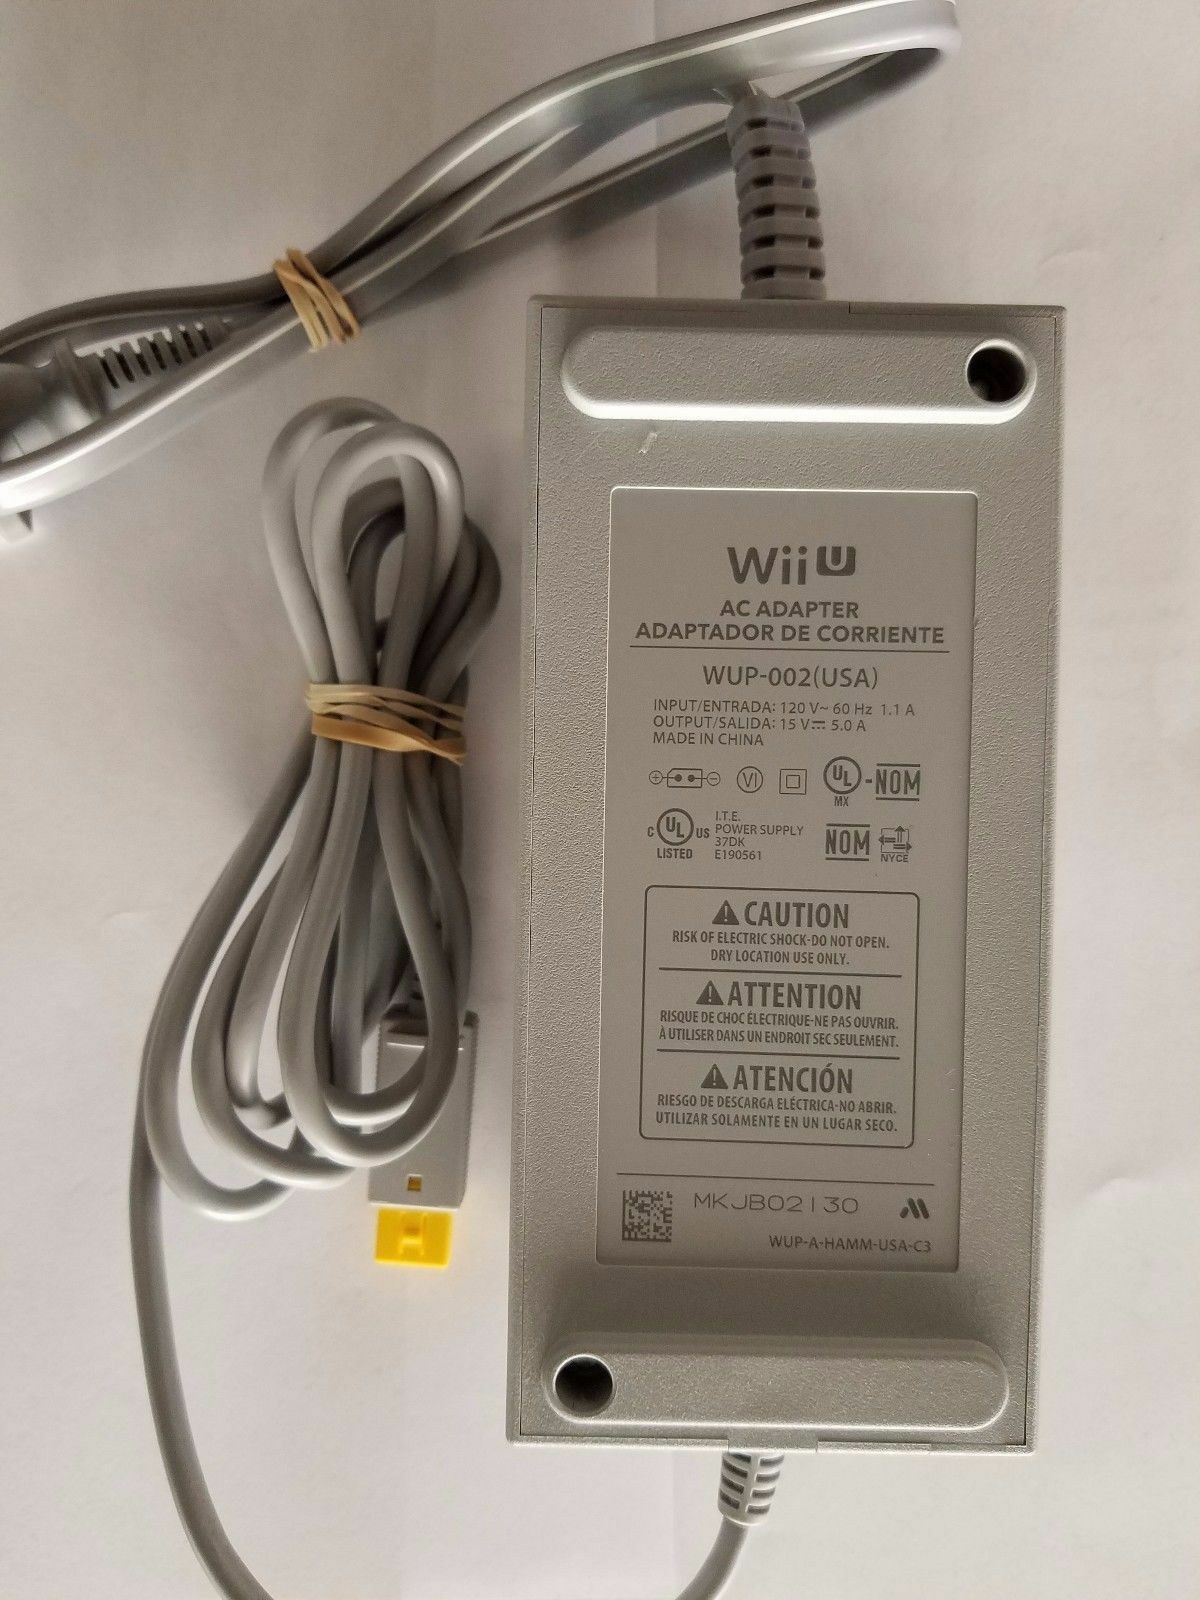 NEW 15V 5A Wii U CONSOLE WUP-002 AC POWER ADAPTER